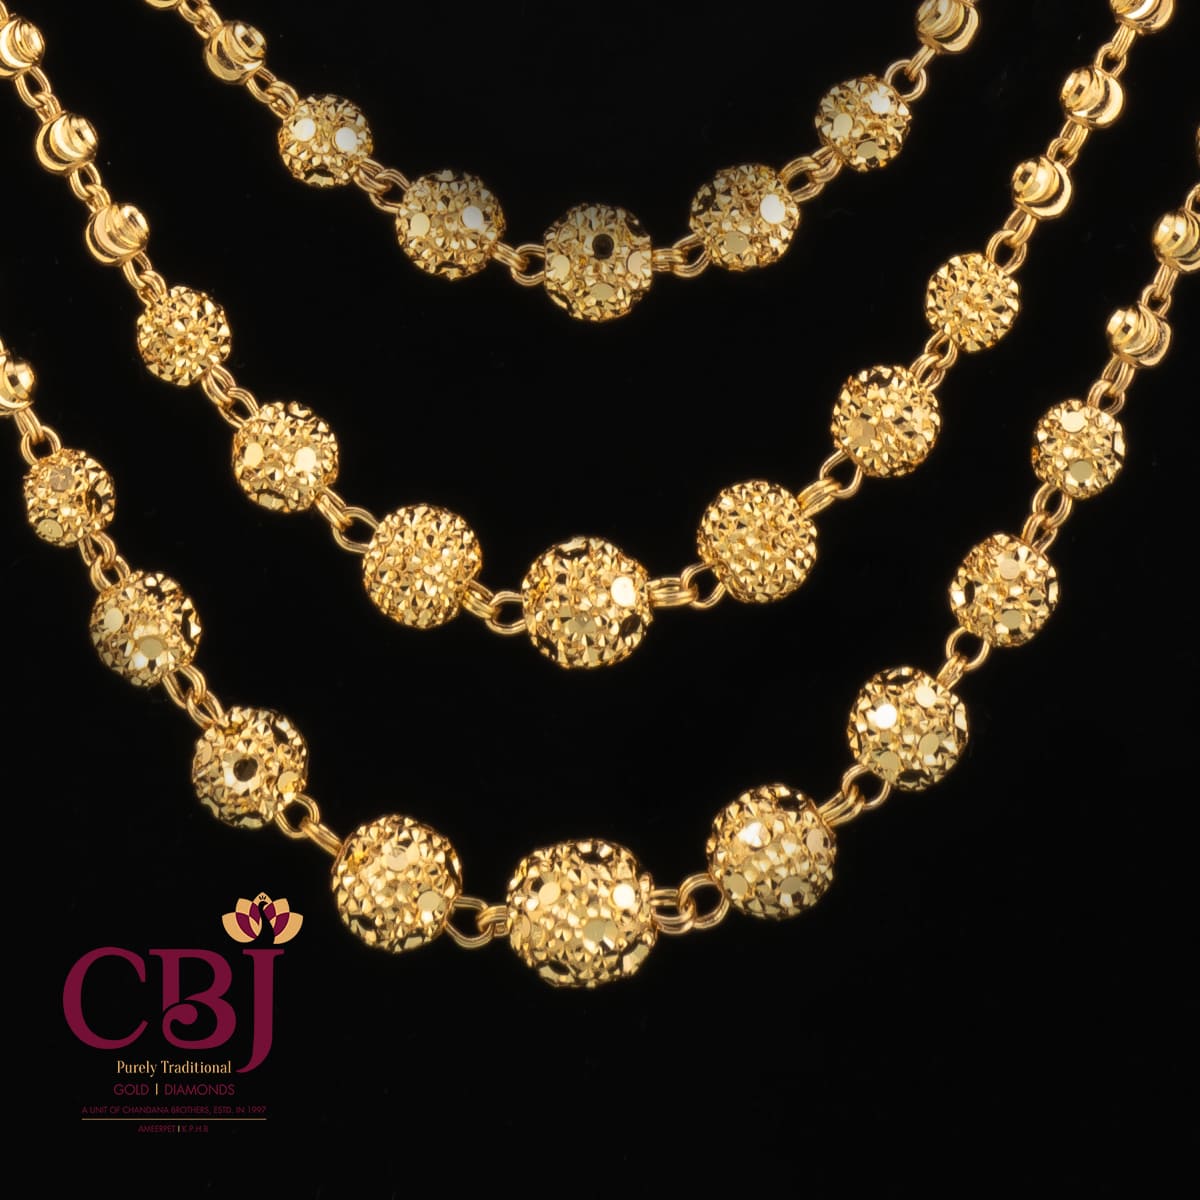 This pure 22k gold ball chain necklace features 3 lines and 2 side pendants.